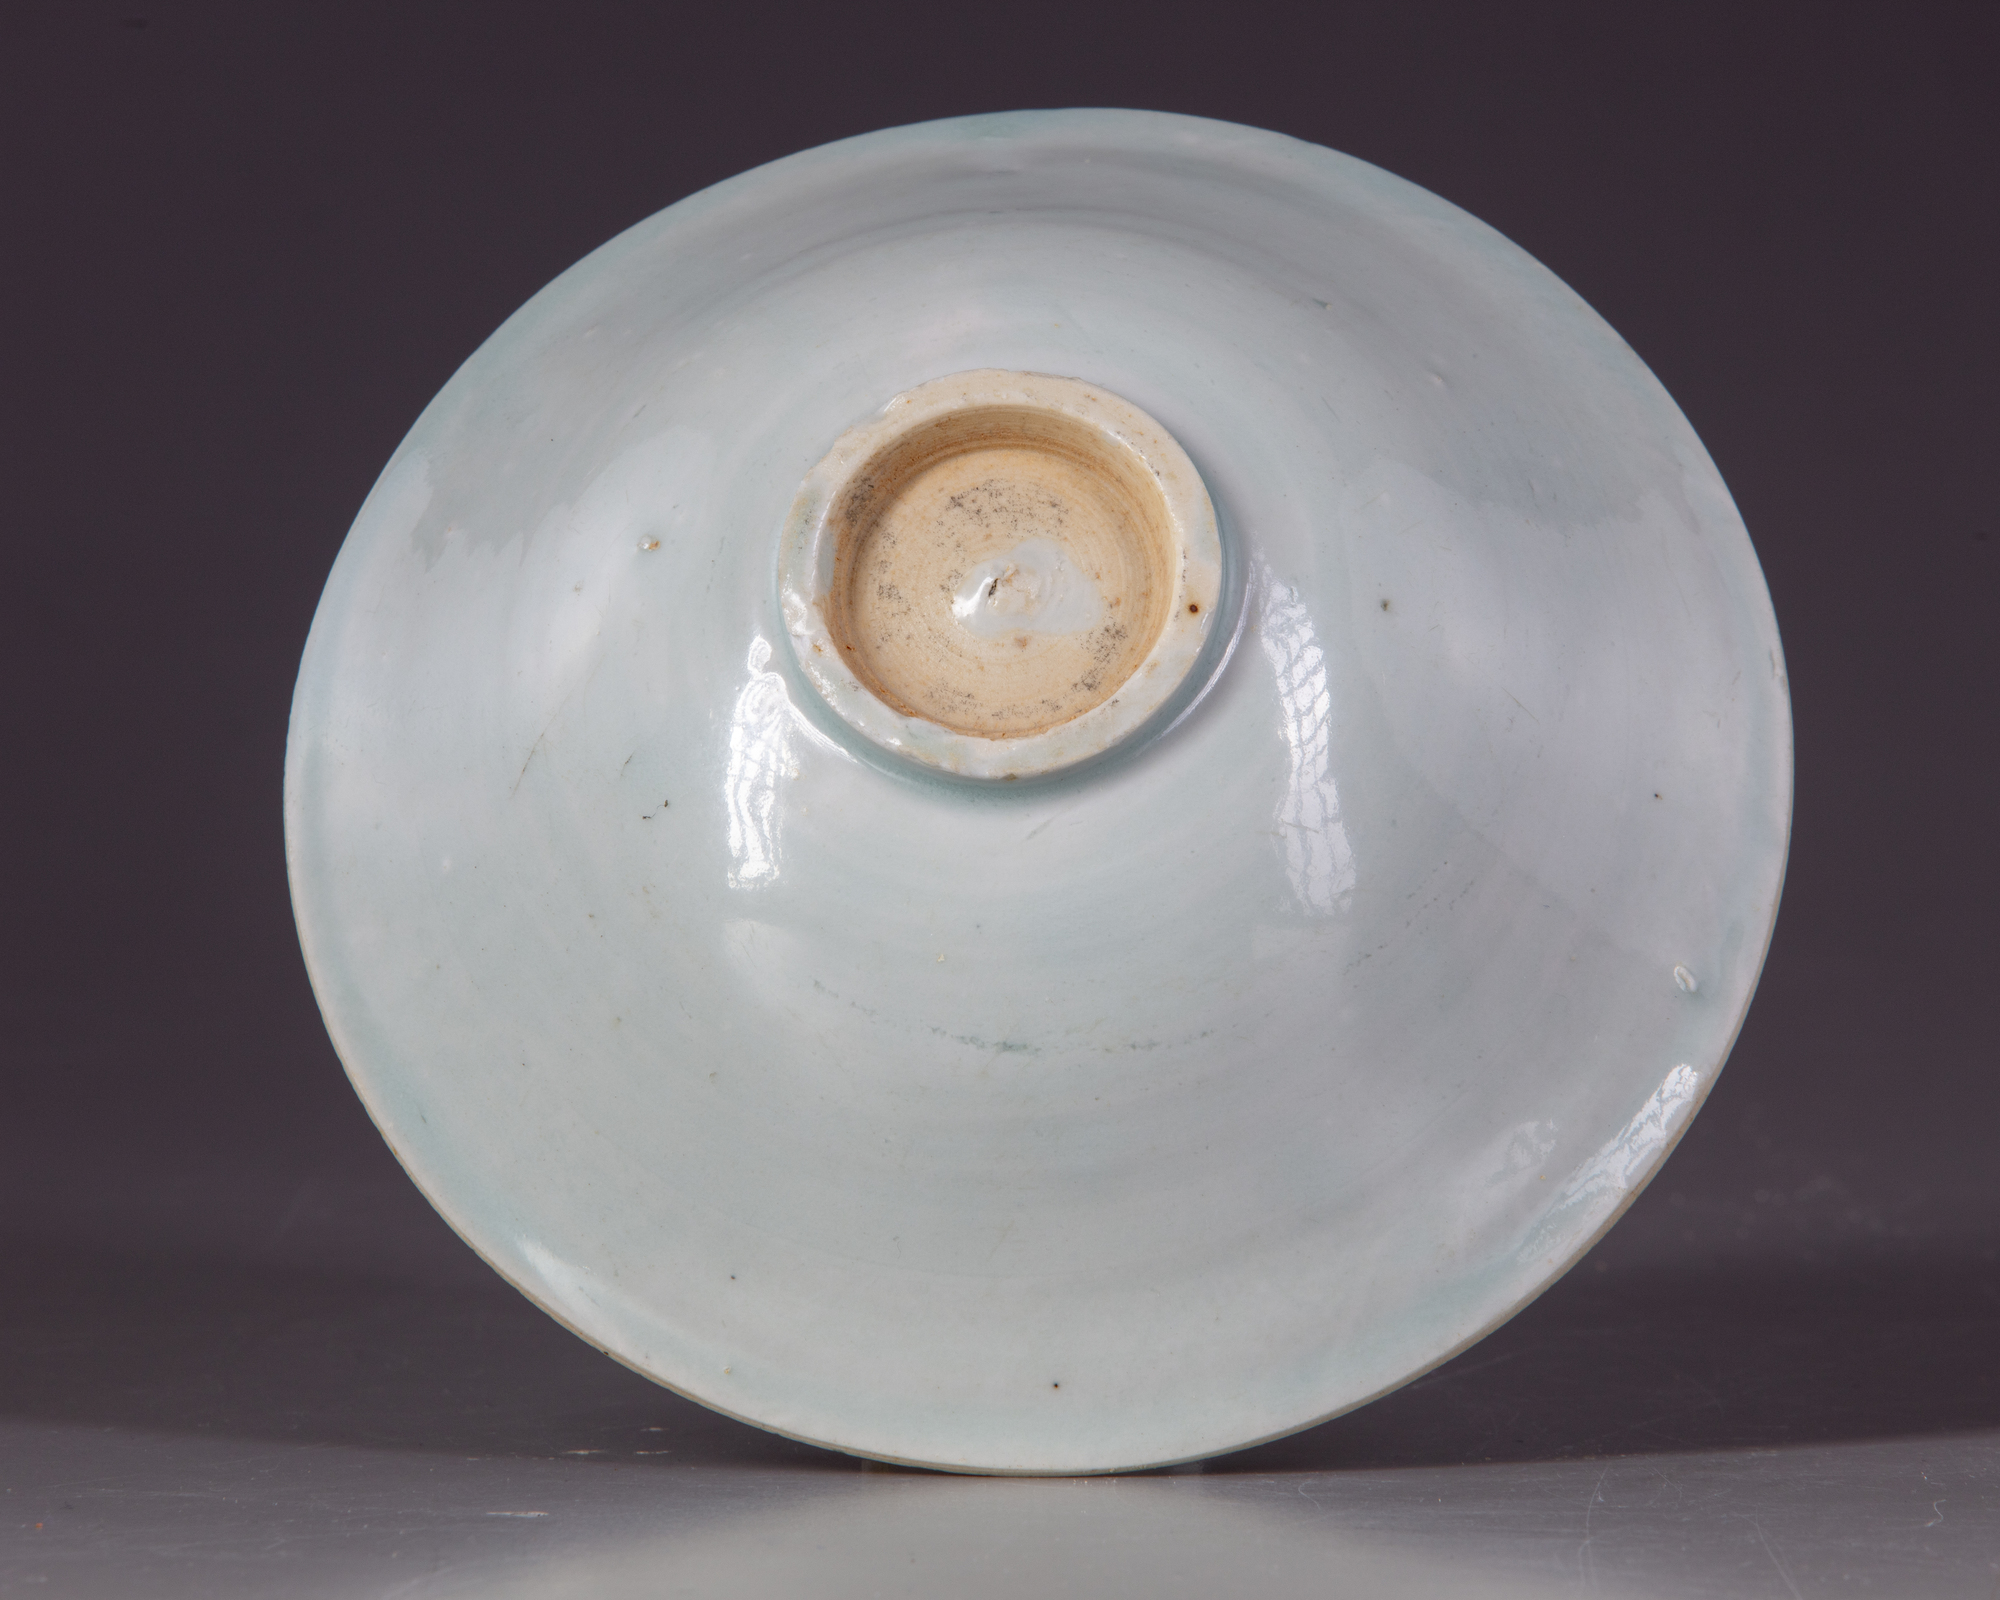 A CHINESE QINGBAI GLAZED 'FLORAL' BOWL, SONG DYNASTY (960-1279) - Image 2 of 2